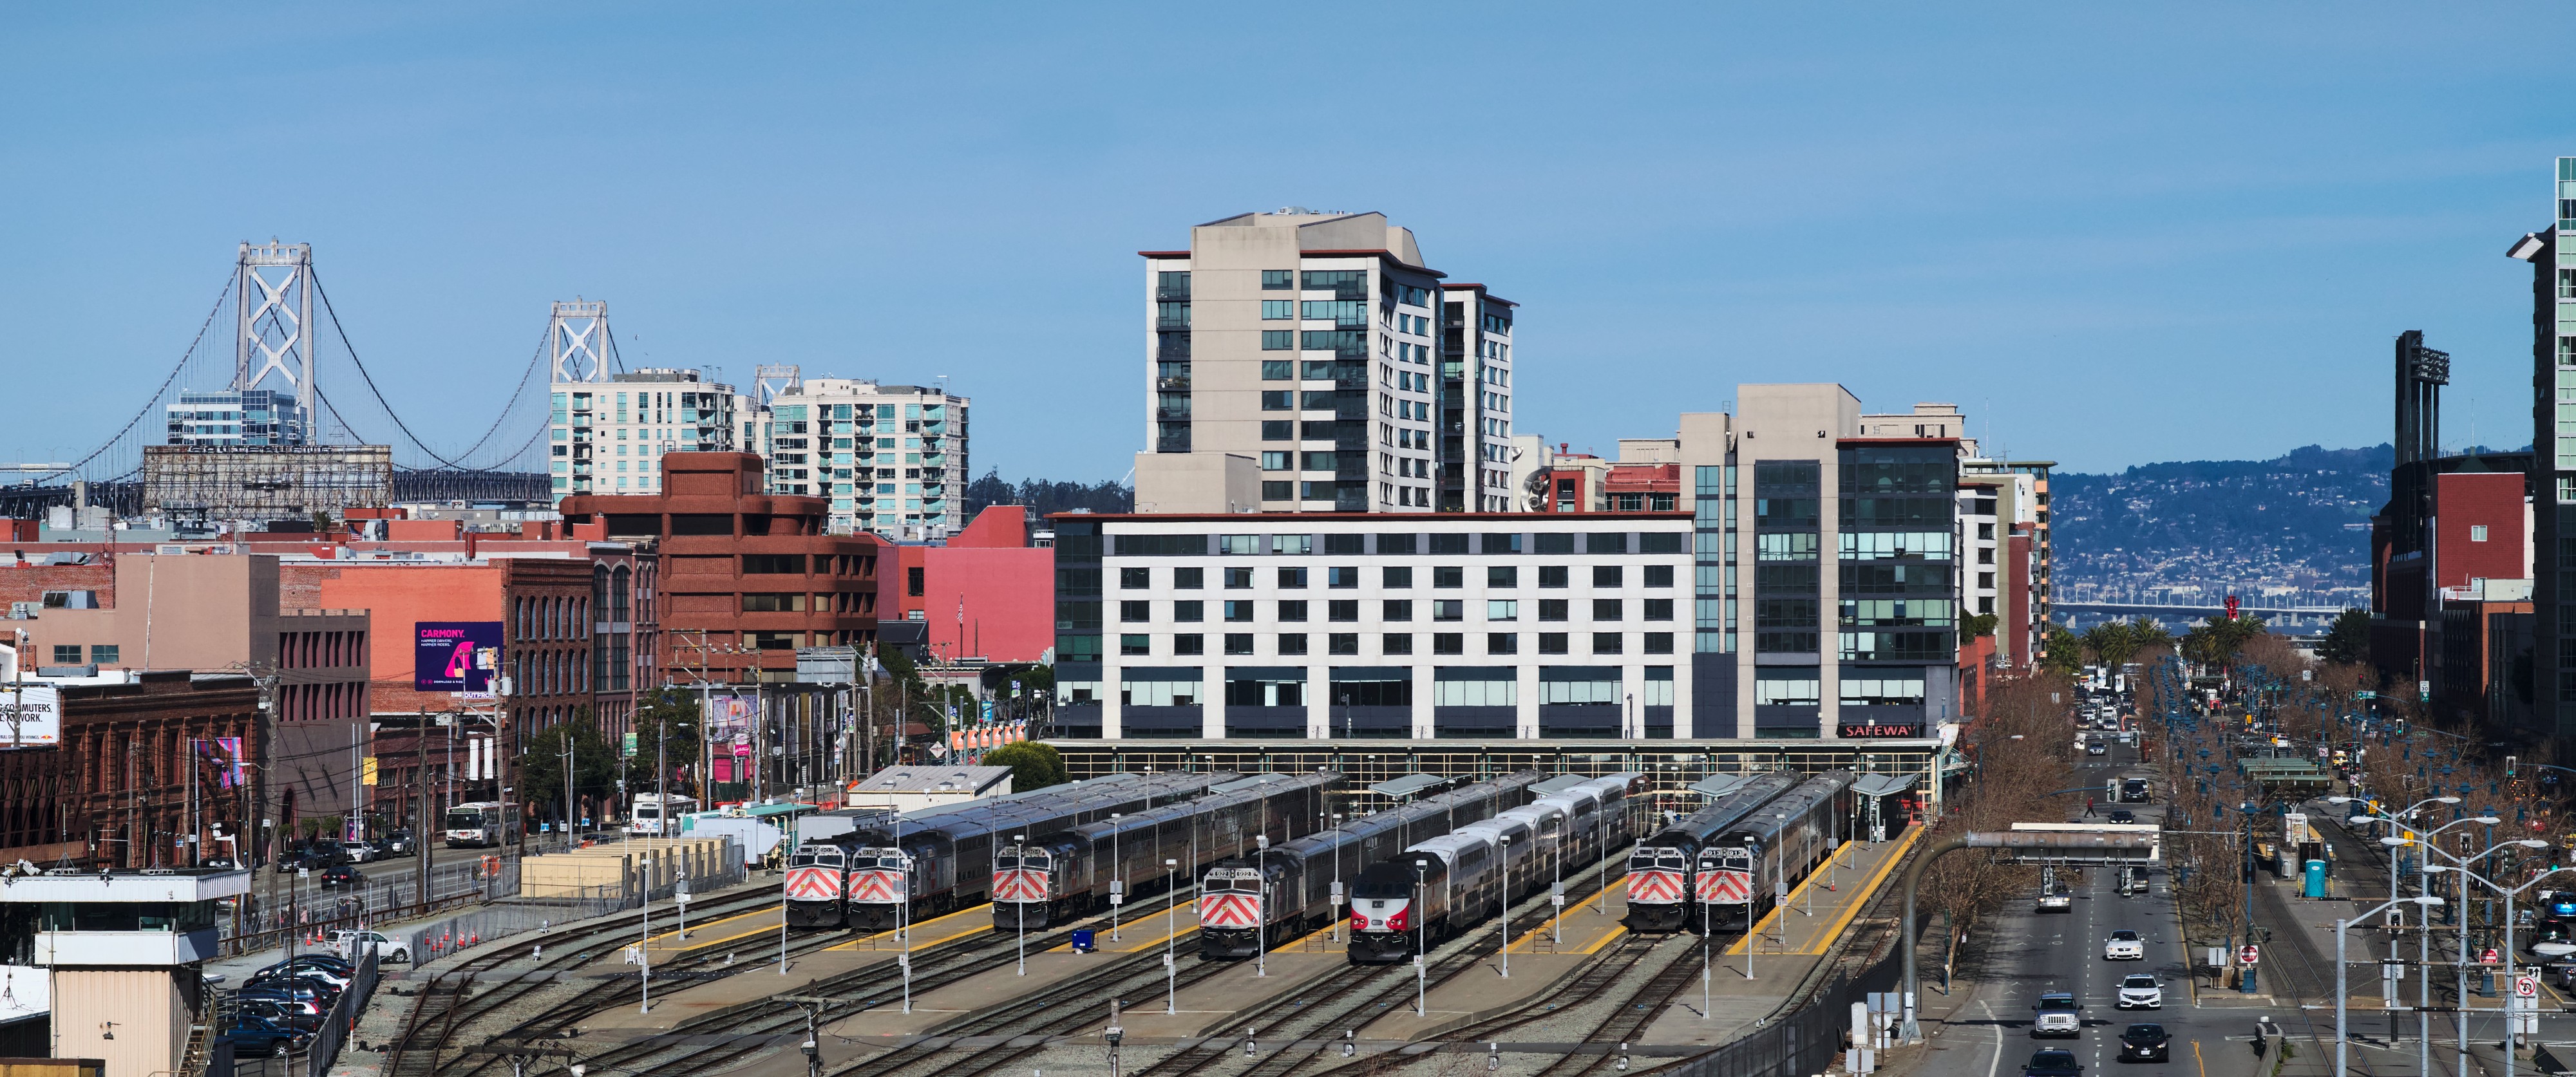 San Francisco Caltrain Station as seen from I-280